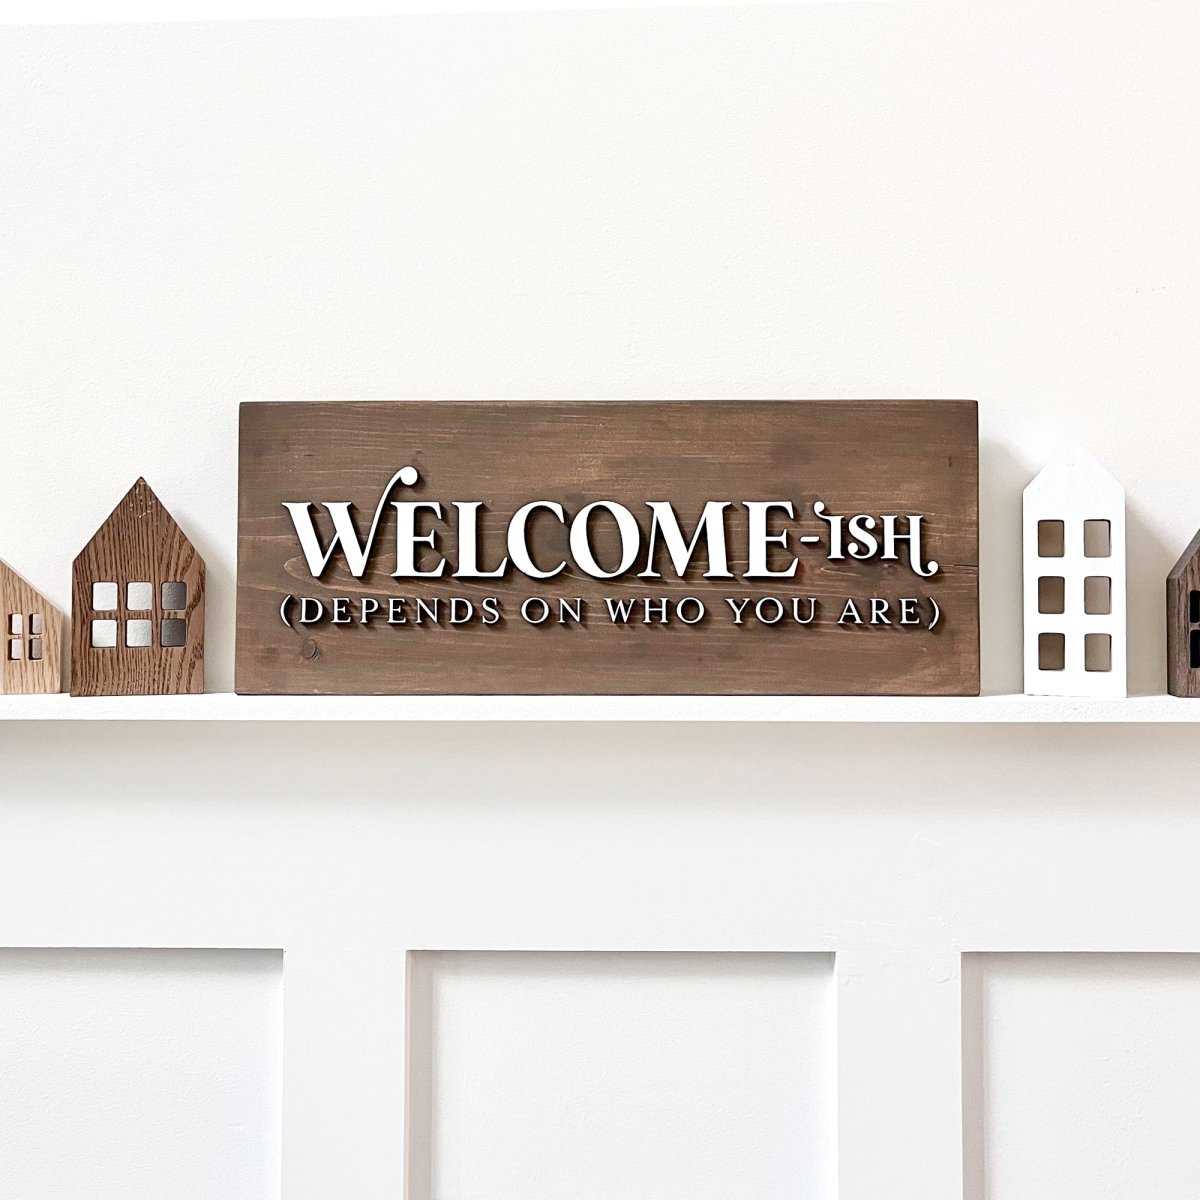 Welcome-ish 3D Wood Sign - sonder and wolf